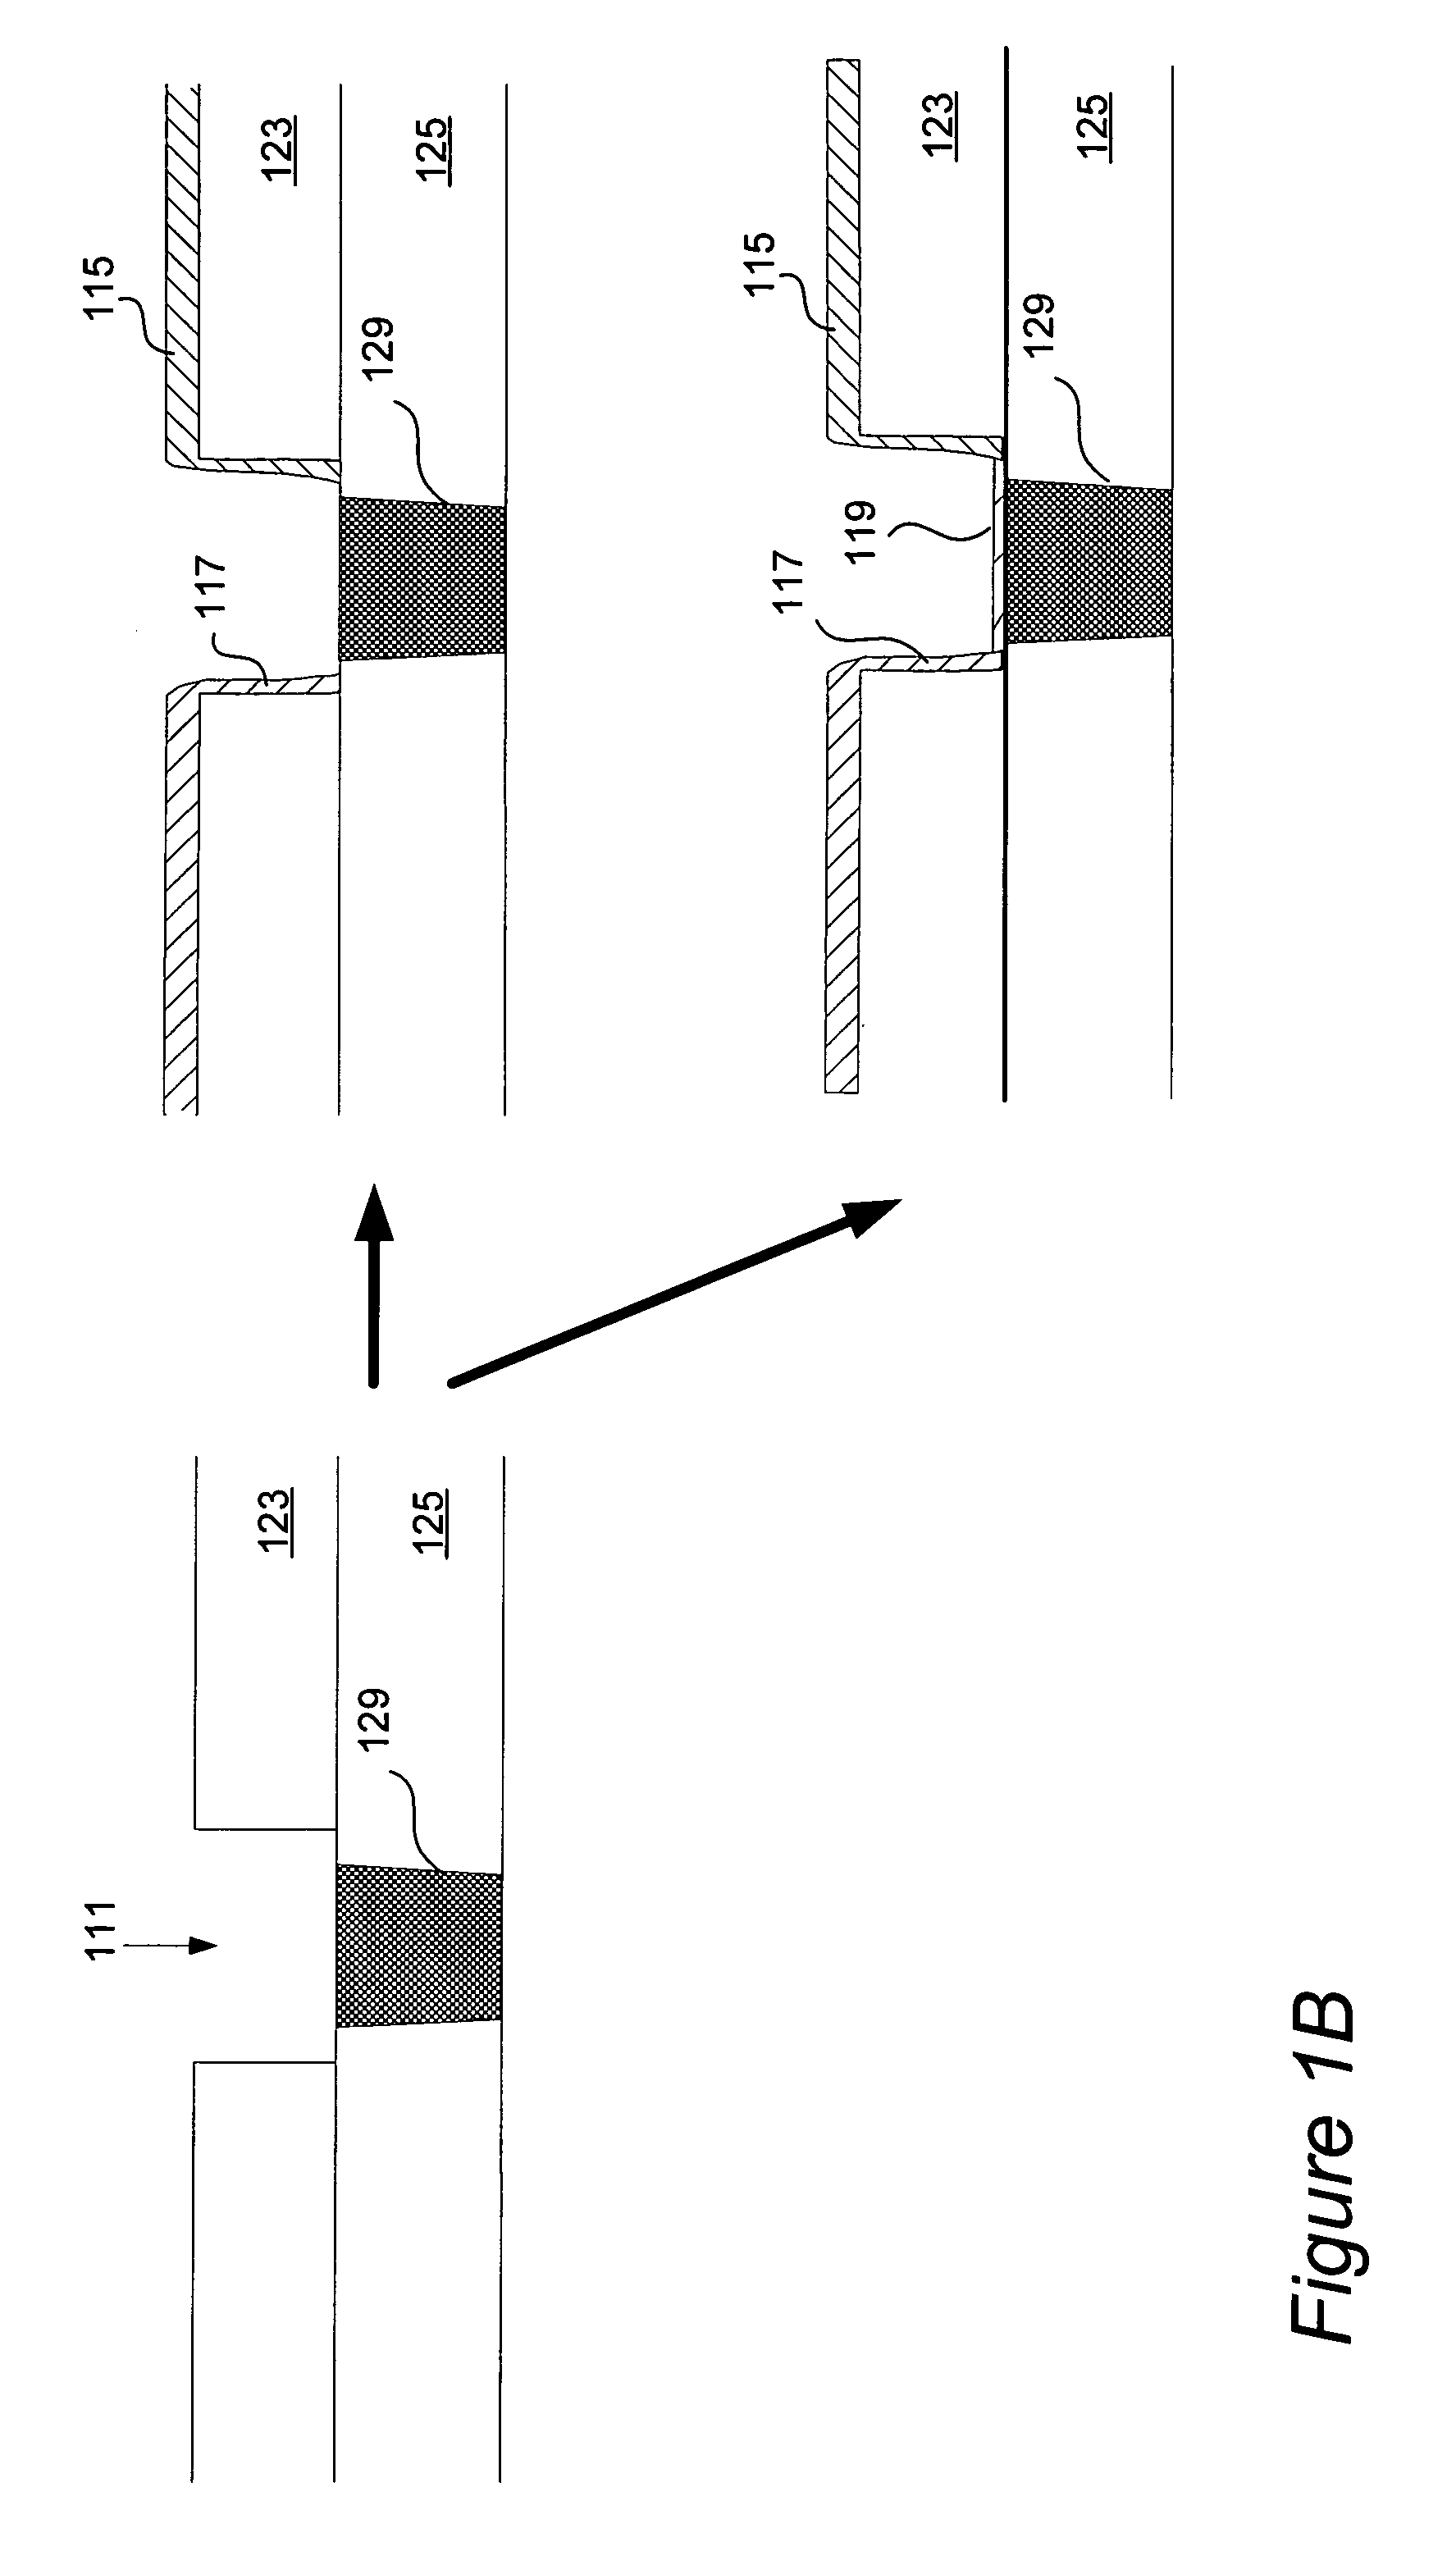 Barrier first method for single damascene trench applications